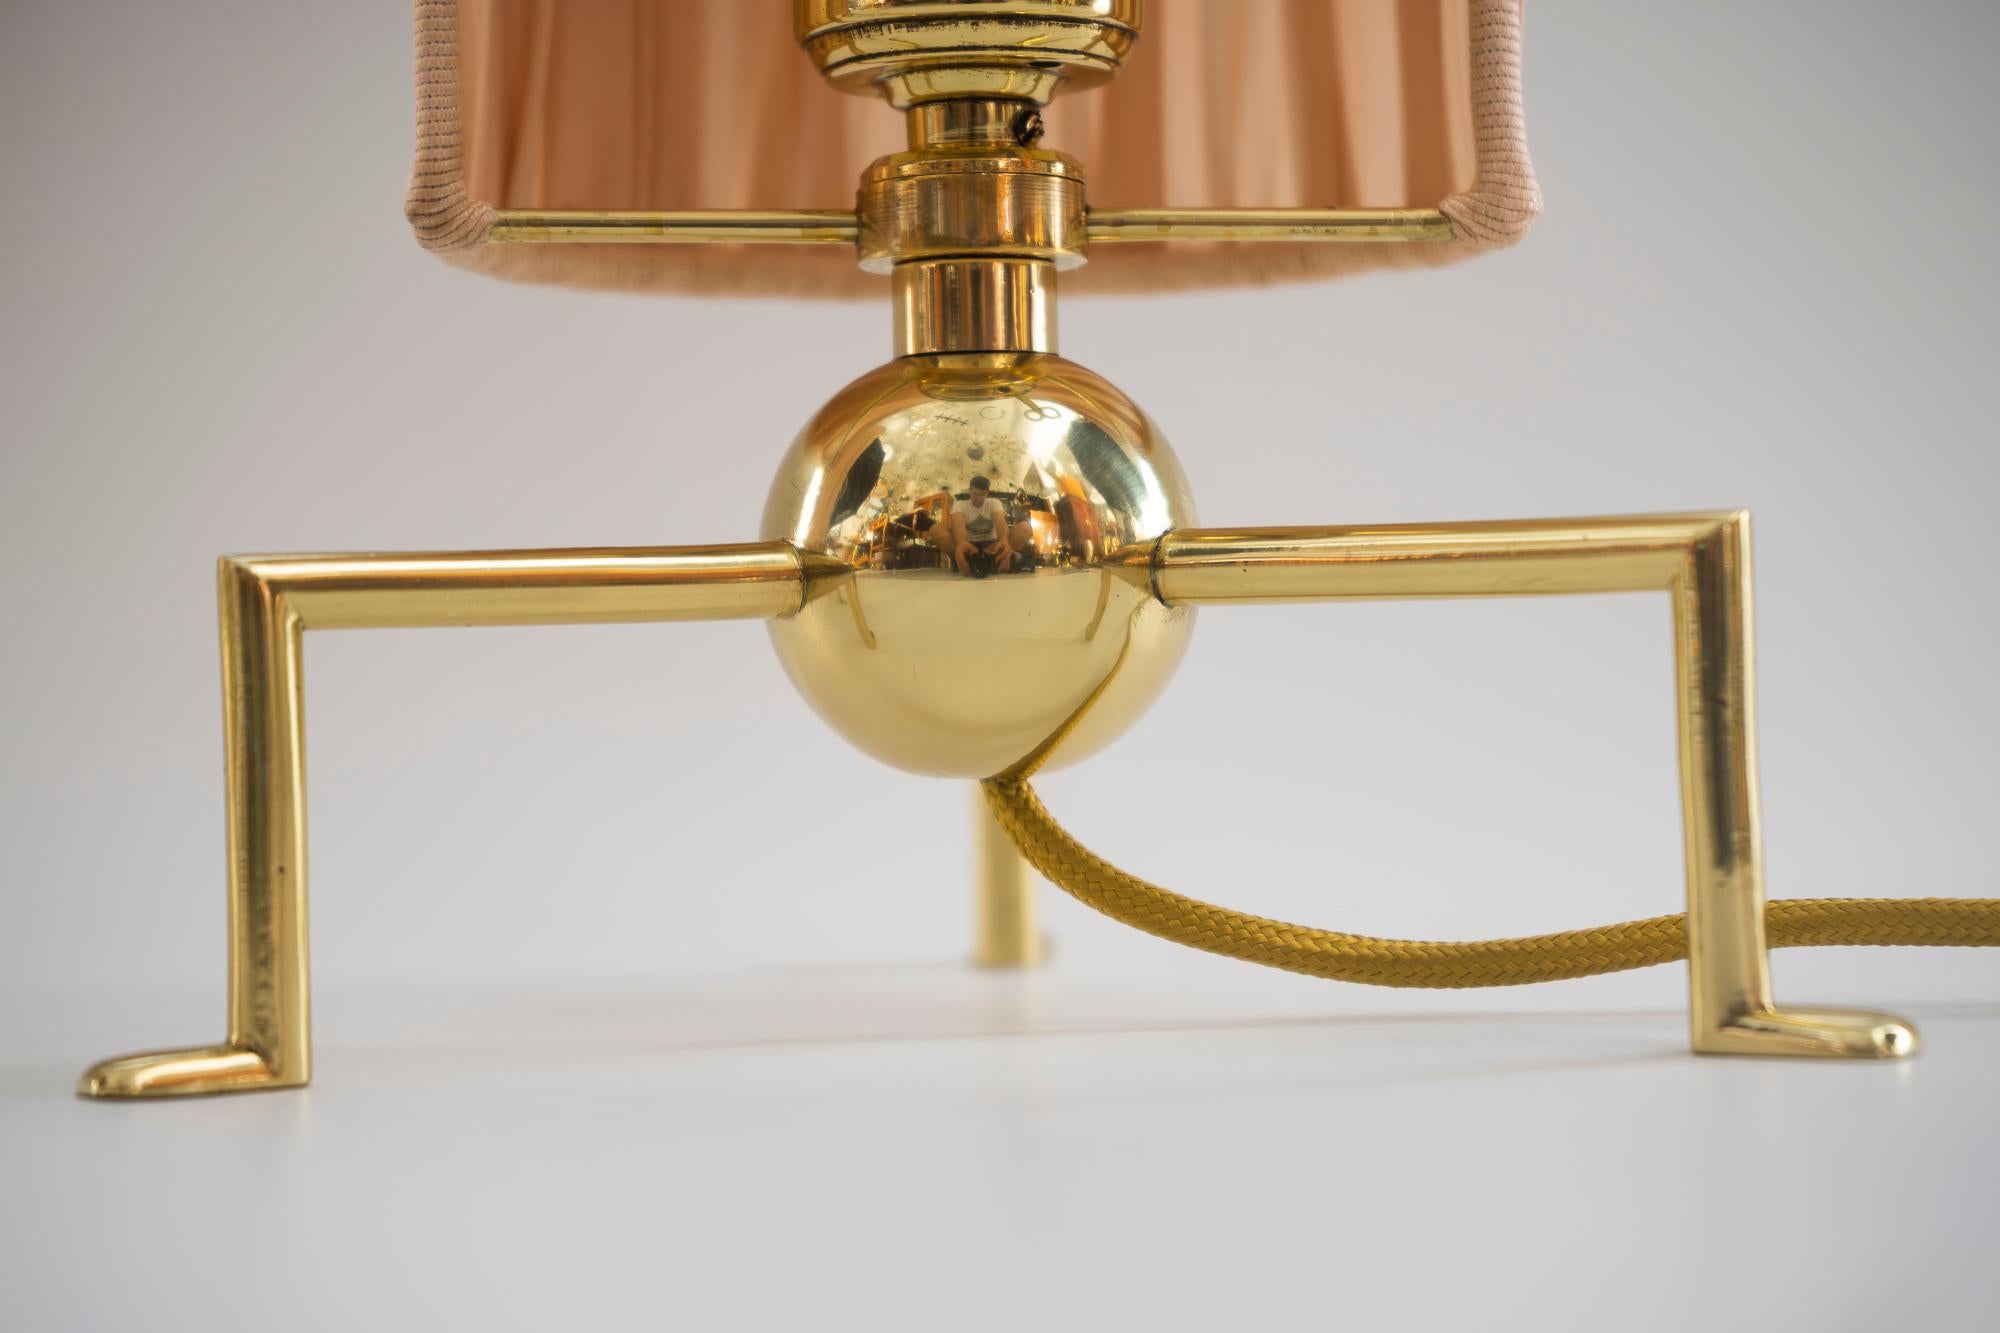 Two Exclusive and Rare Art Deco Table Lamp, Vienna, 1920s For Sale 6